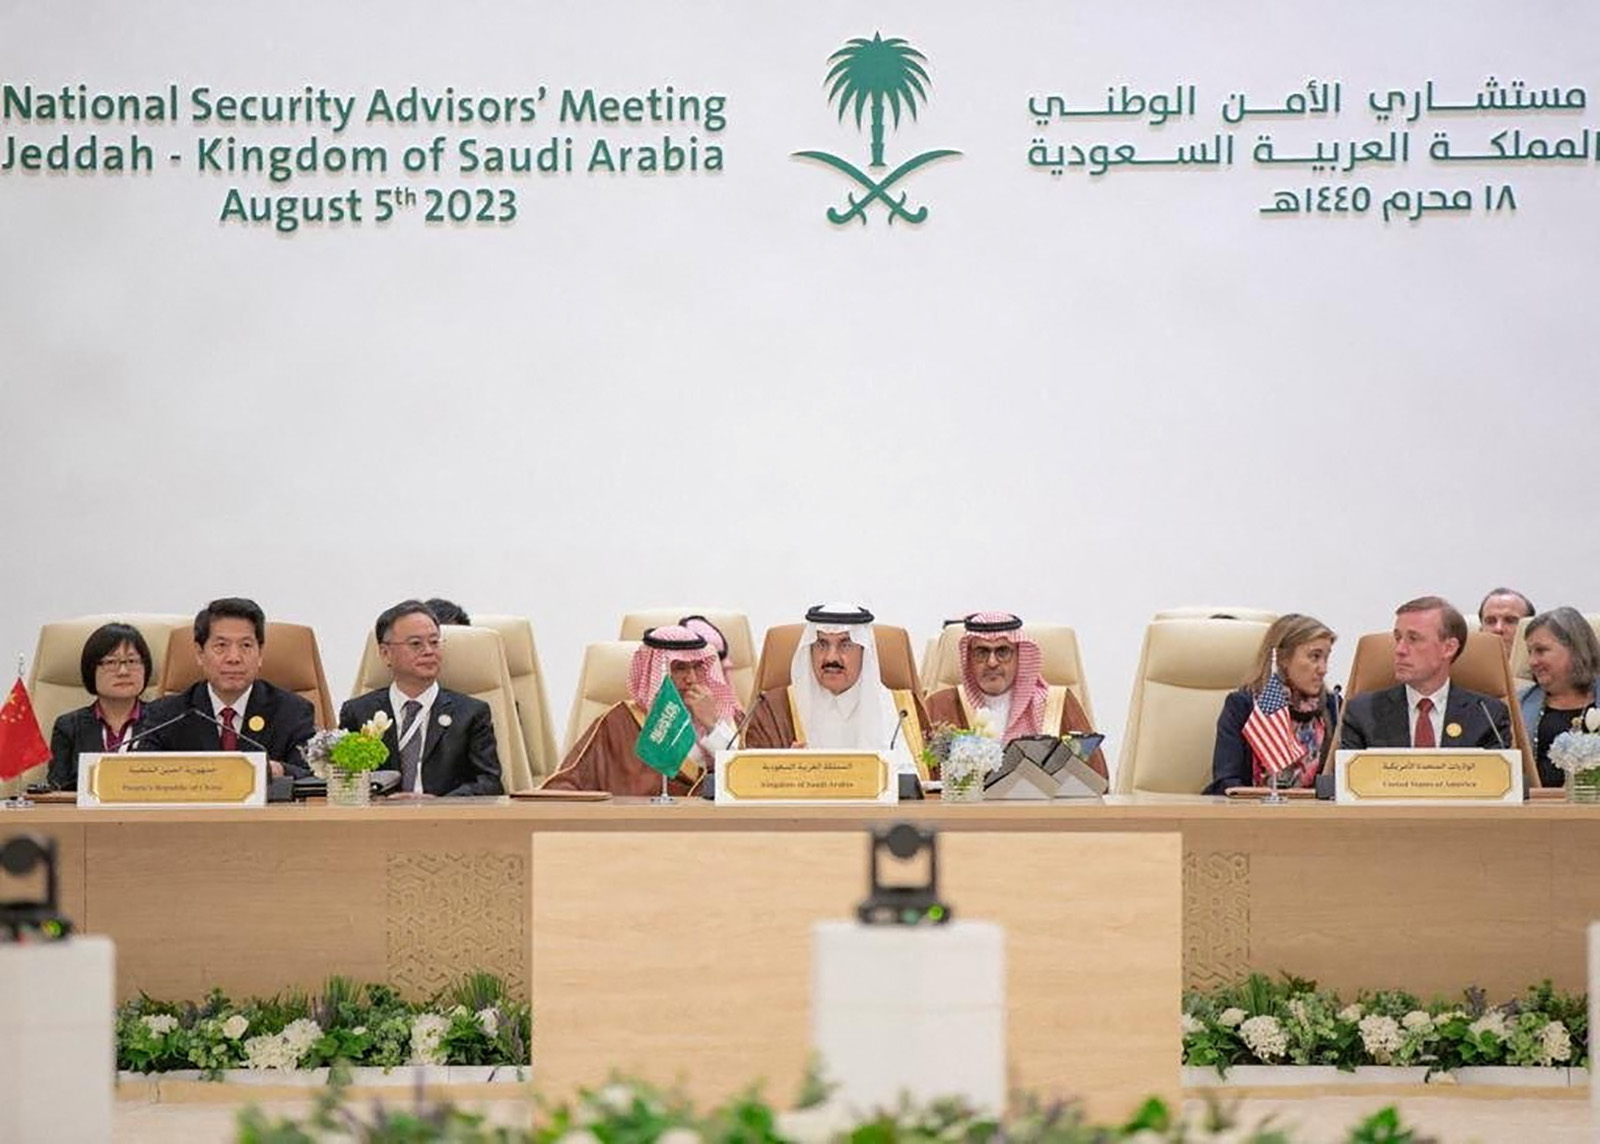 Representatives from China (L) and the United States (R) attended talks on Ukraine in Saudi Arabia last weekend.